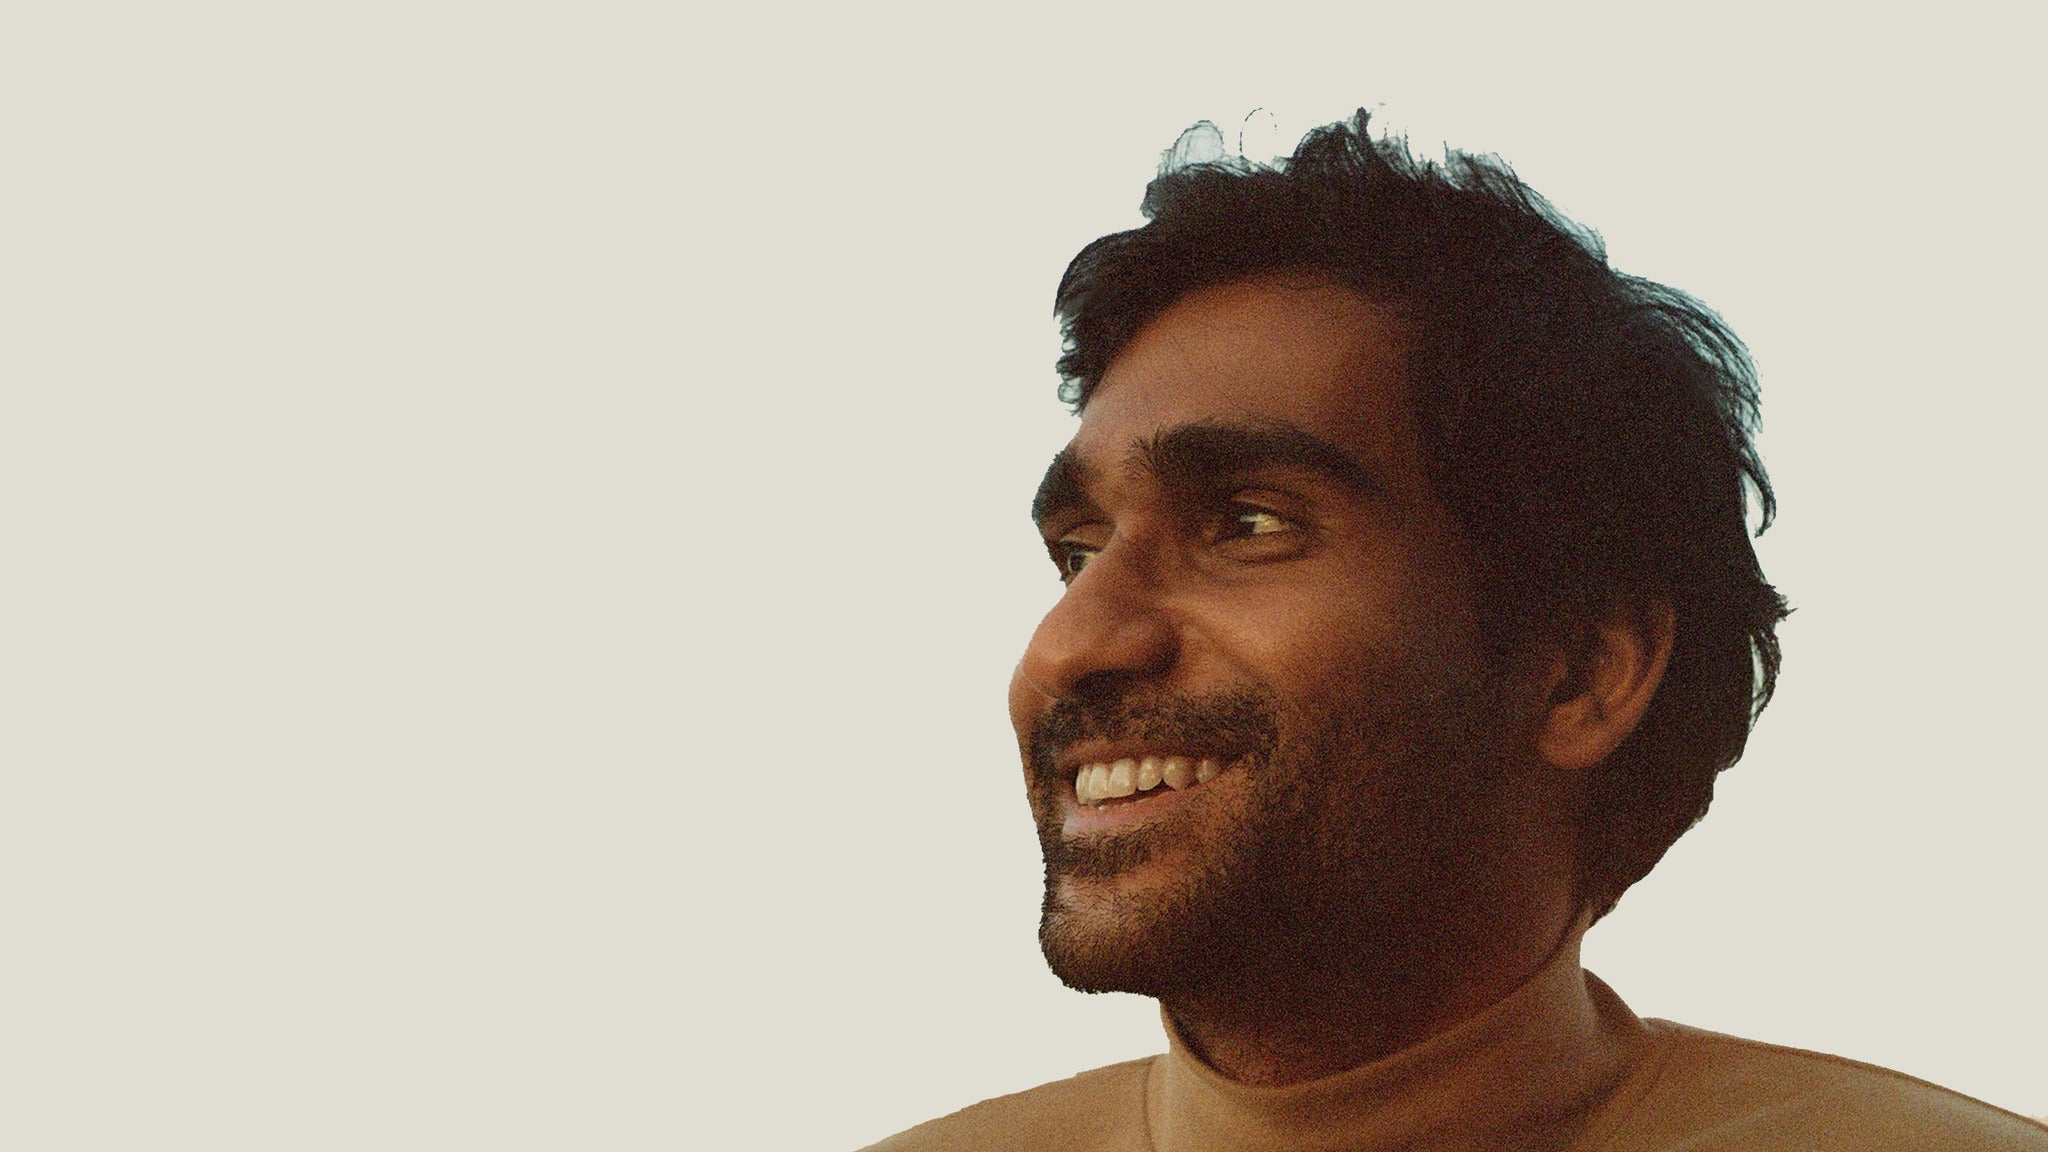 Prateek Kuhad in Somerville promo photo for Bowery presale offer code